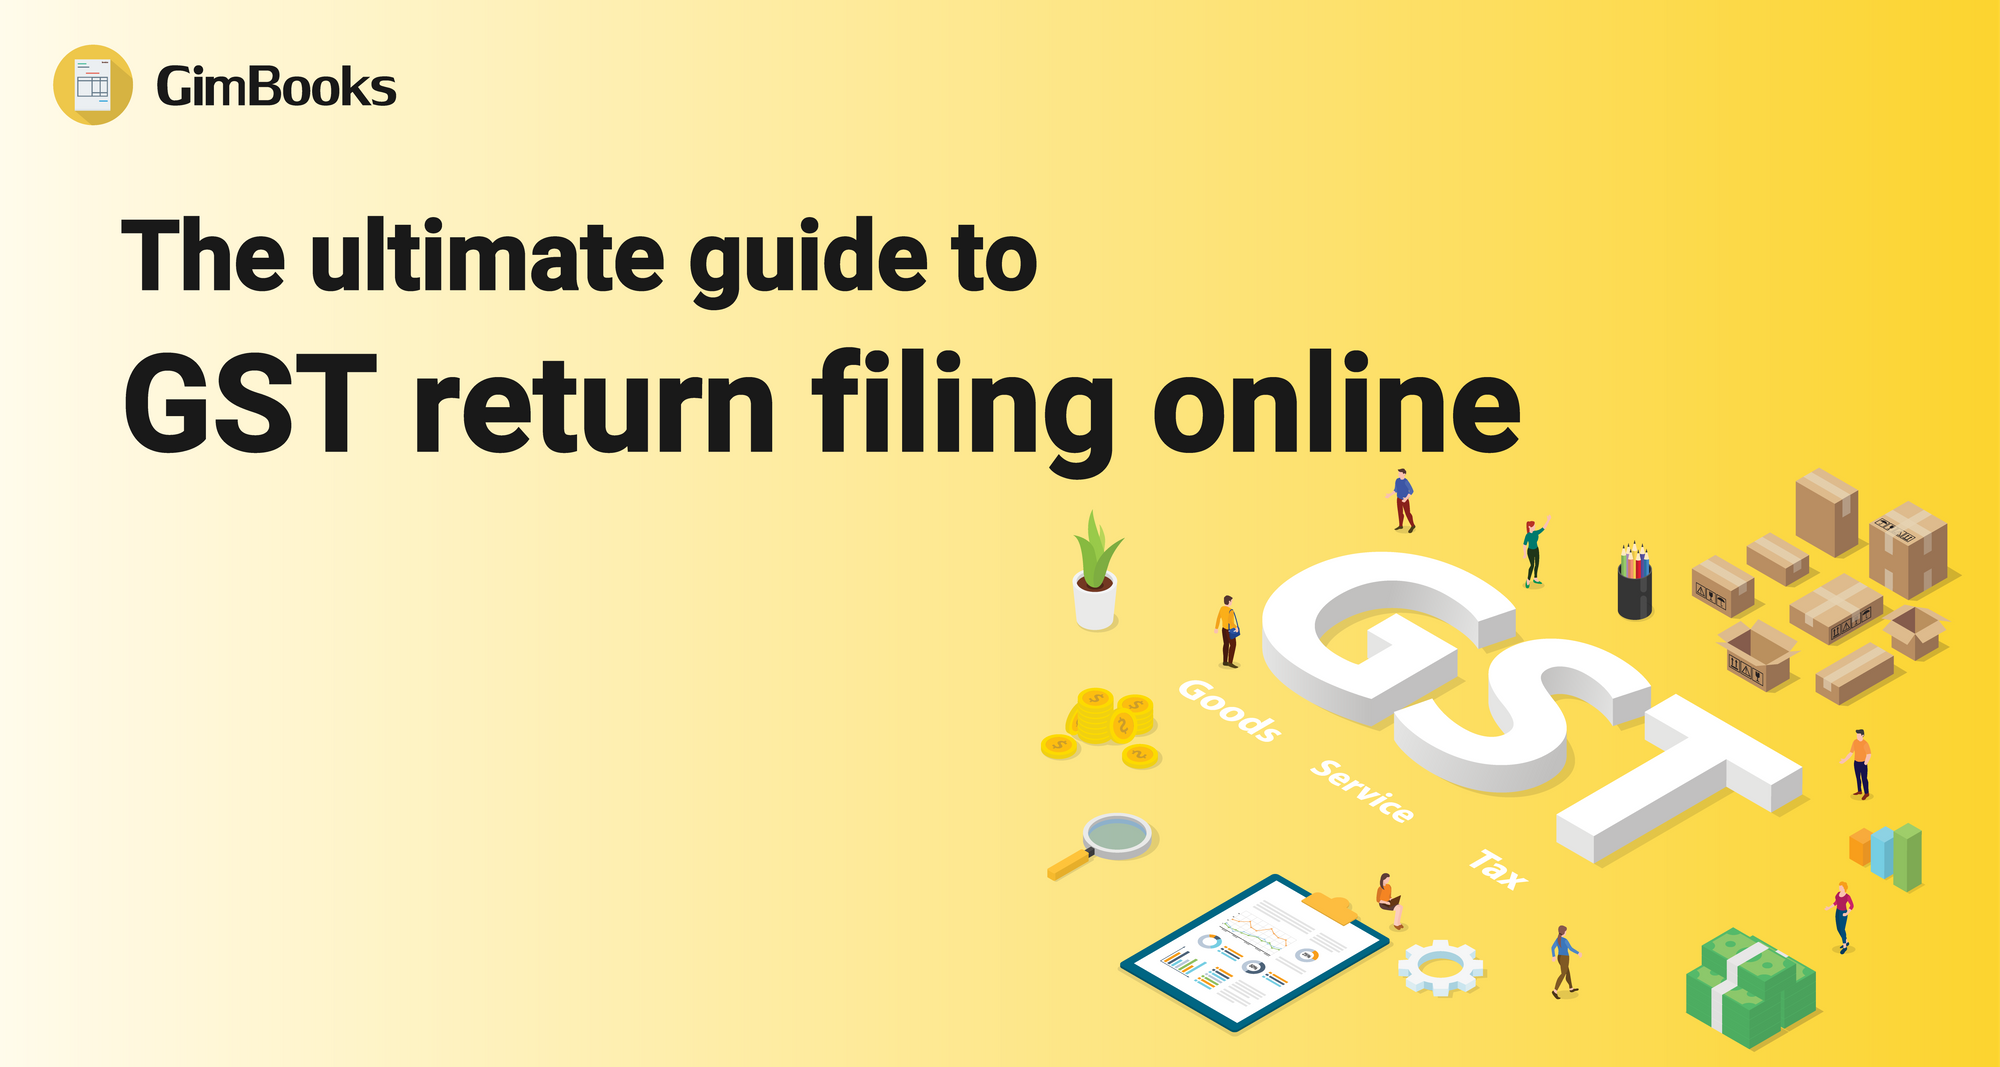 The Ultimate Guide to GST Return Filing Online | GimBooks